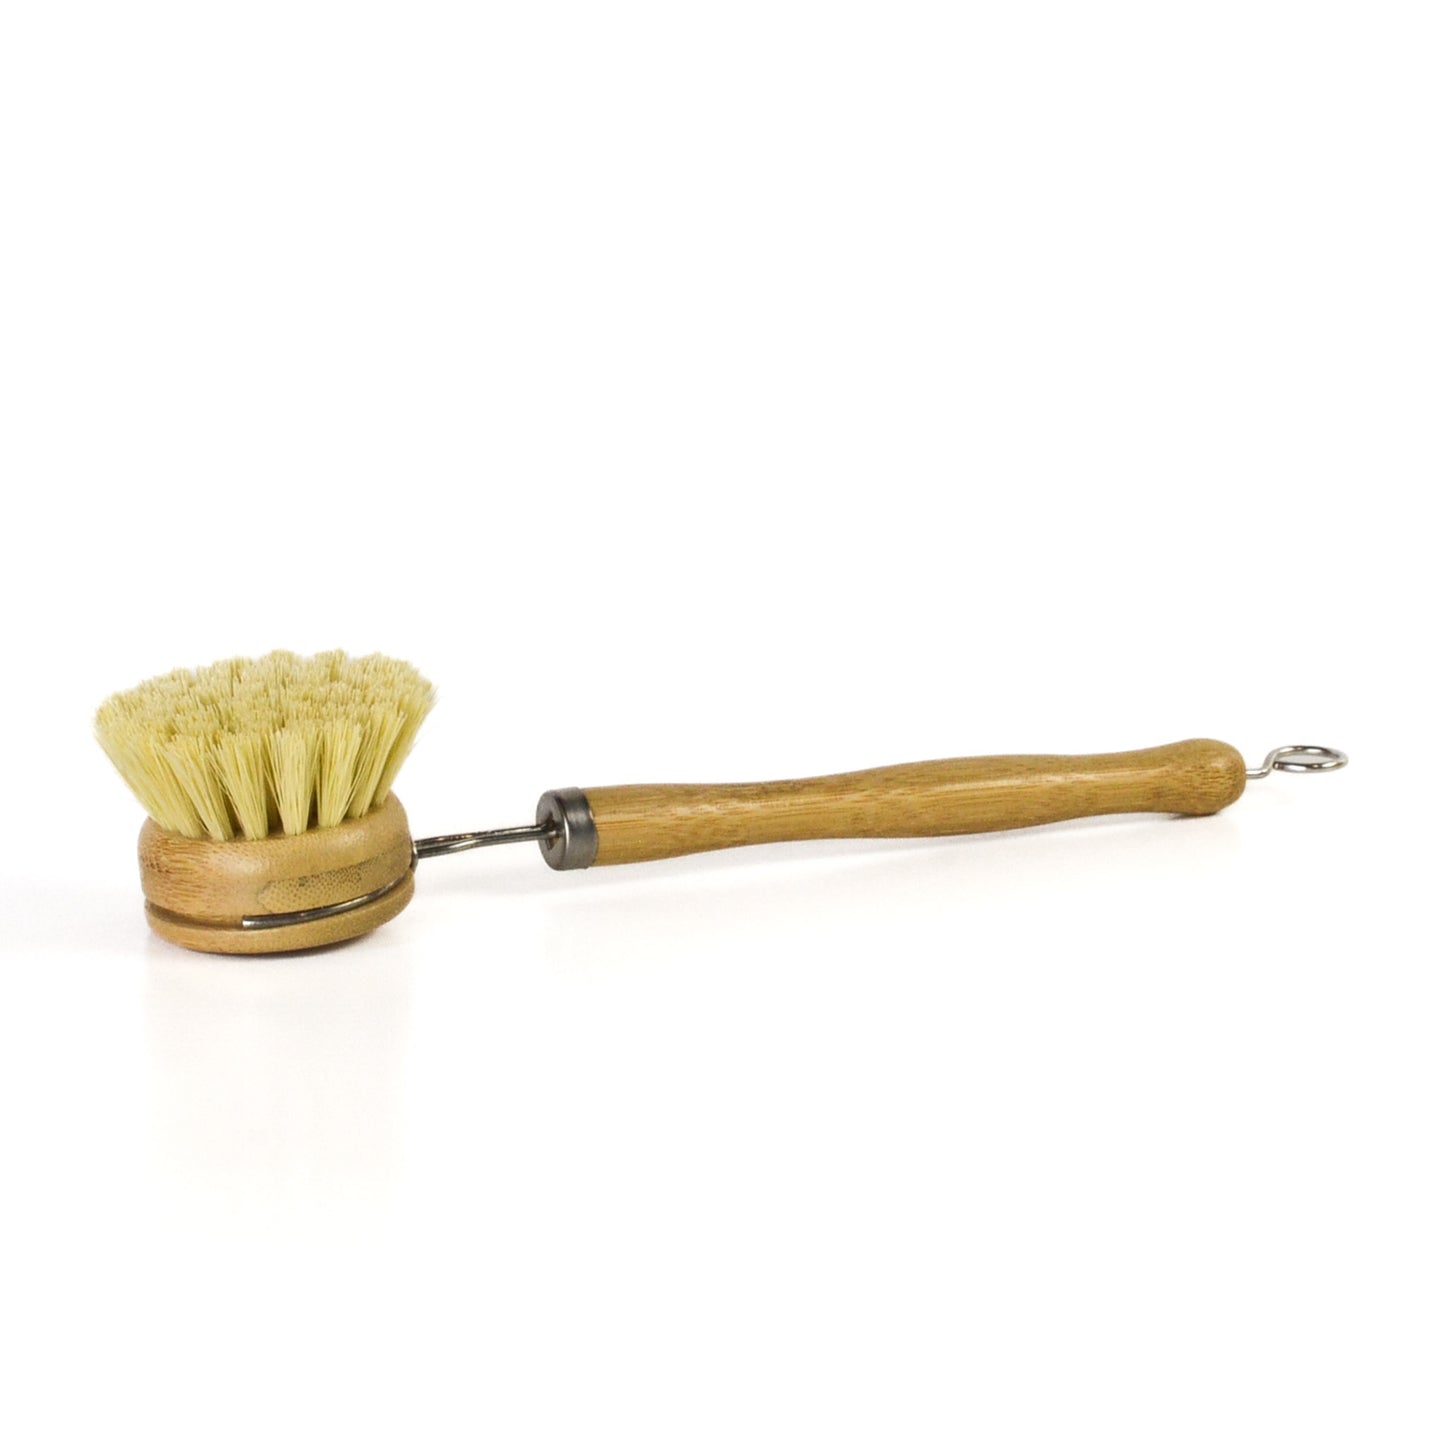 Reusable kitchen dish brush with handle and replaceable scrubbing head